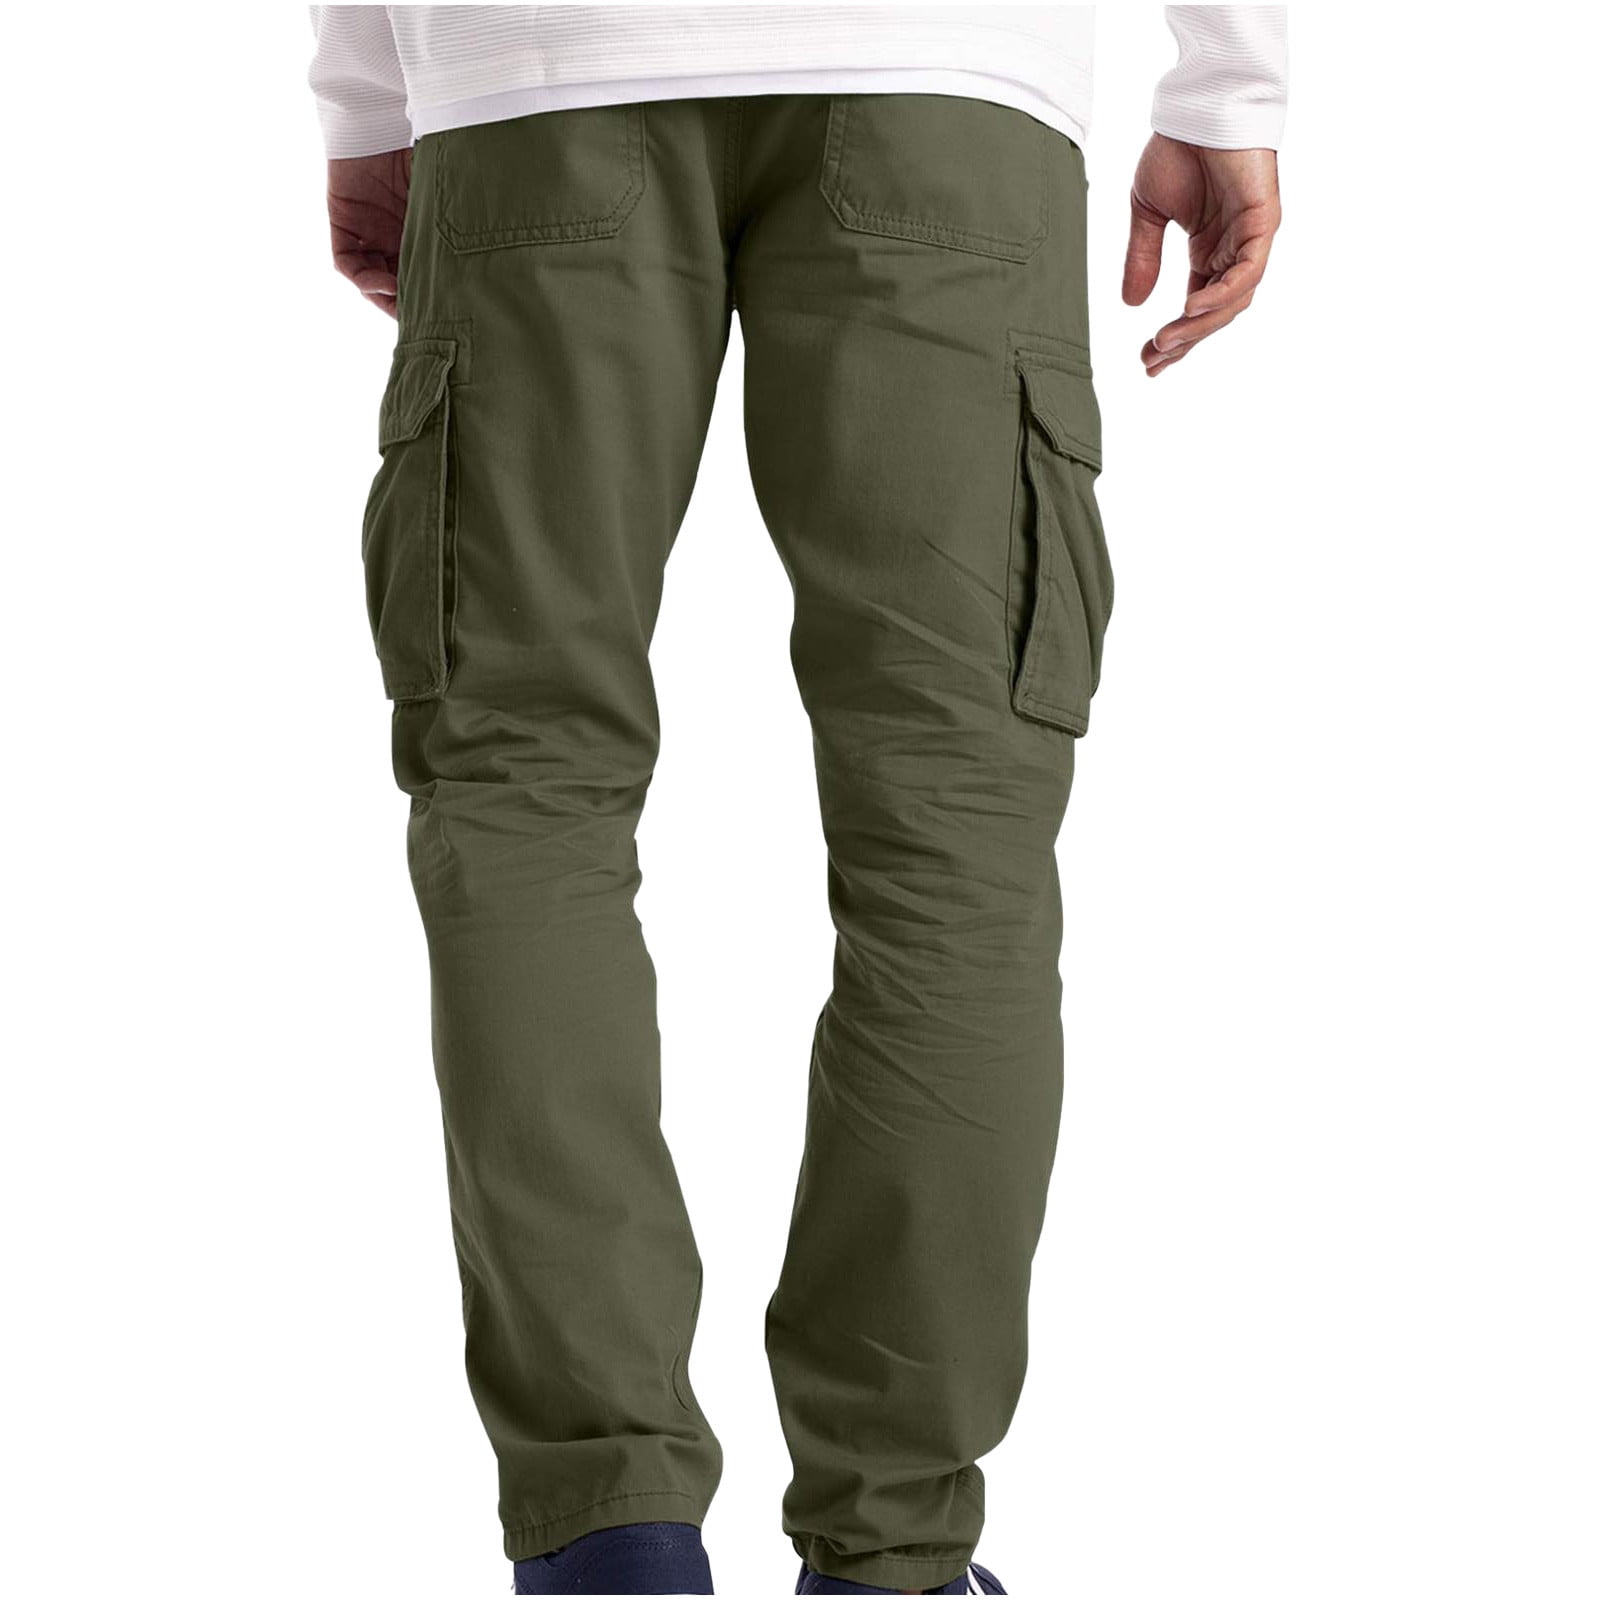 Cargo pants for men Trousers Work Wear Combat Cargo 6 Pocket Full Pants 511  Tactical Pants Outdoor sports pants Army Green L 